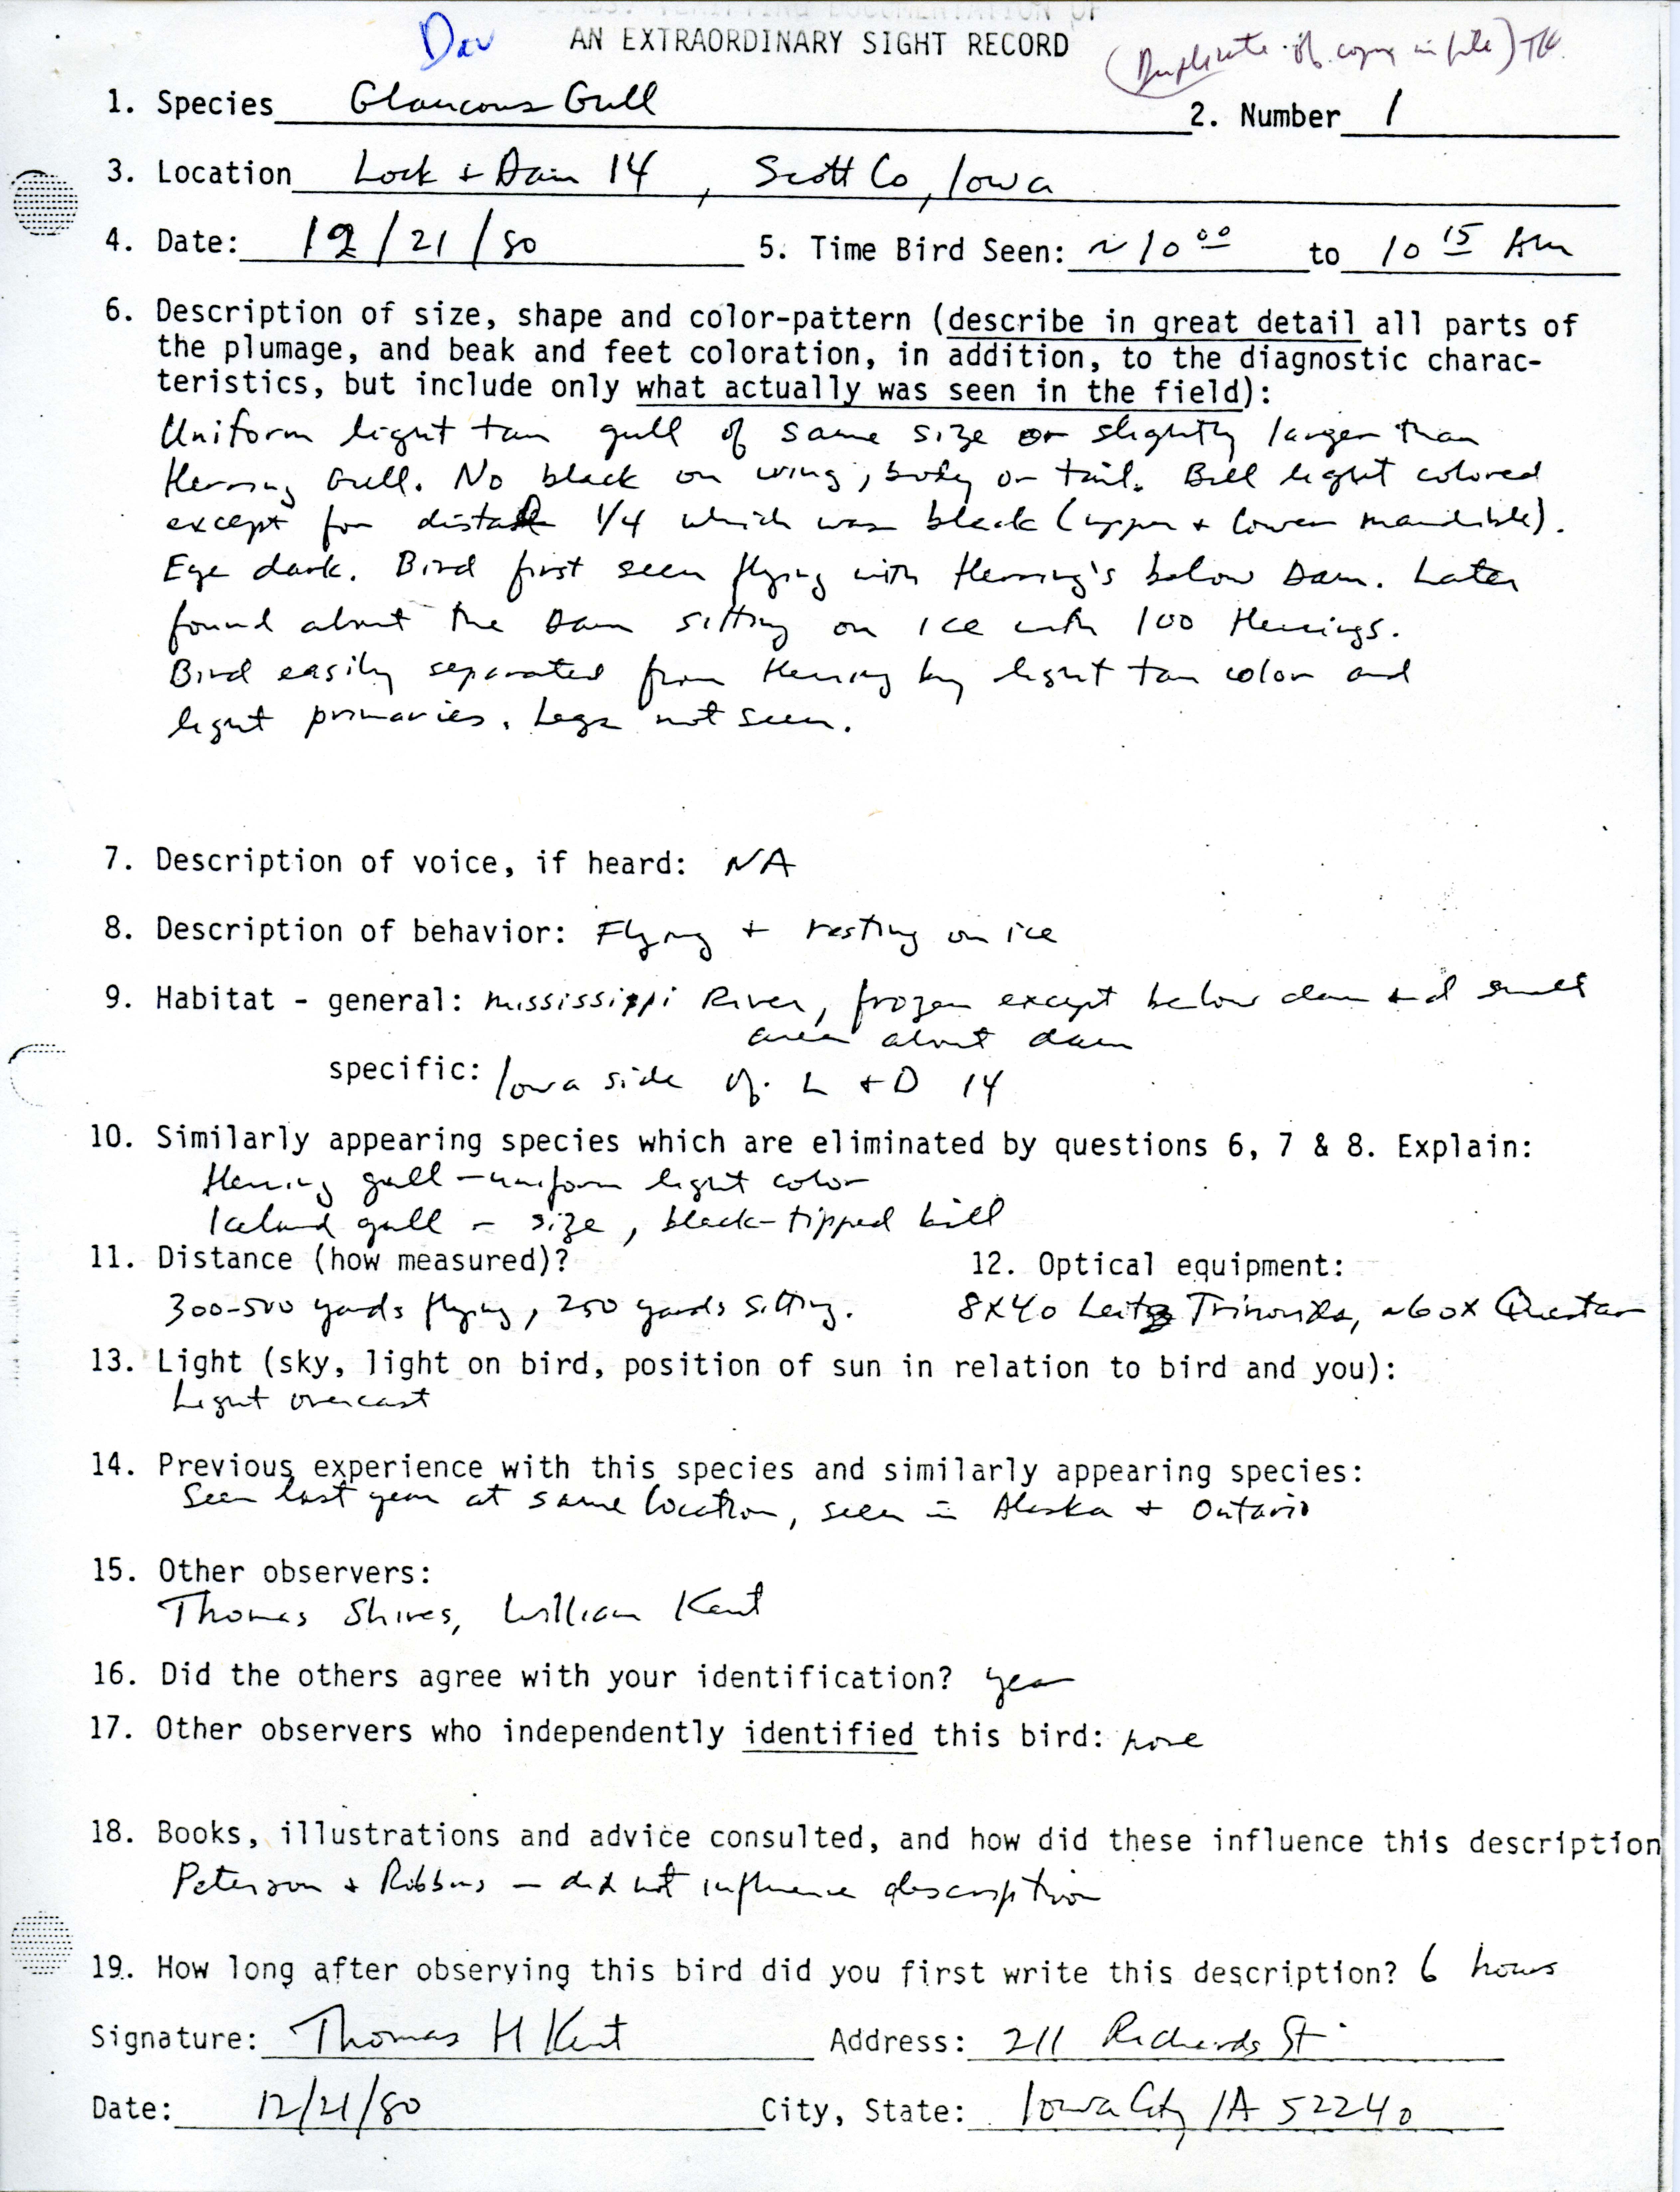 Verifying documentation form for Glaucous Gull sighting submitted by Thomas H. Kent, December 21 1980